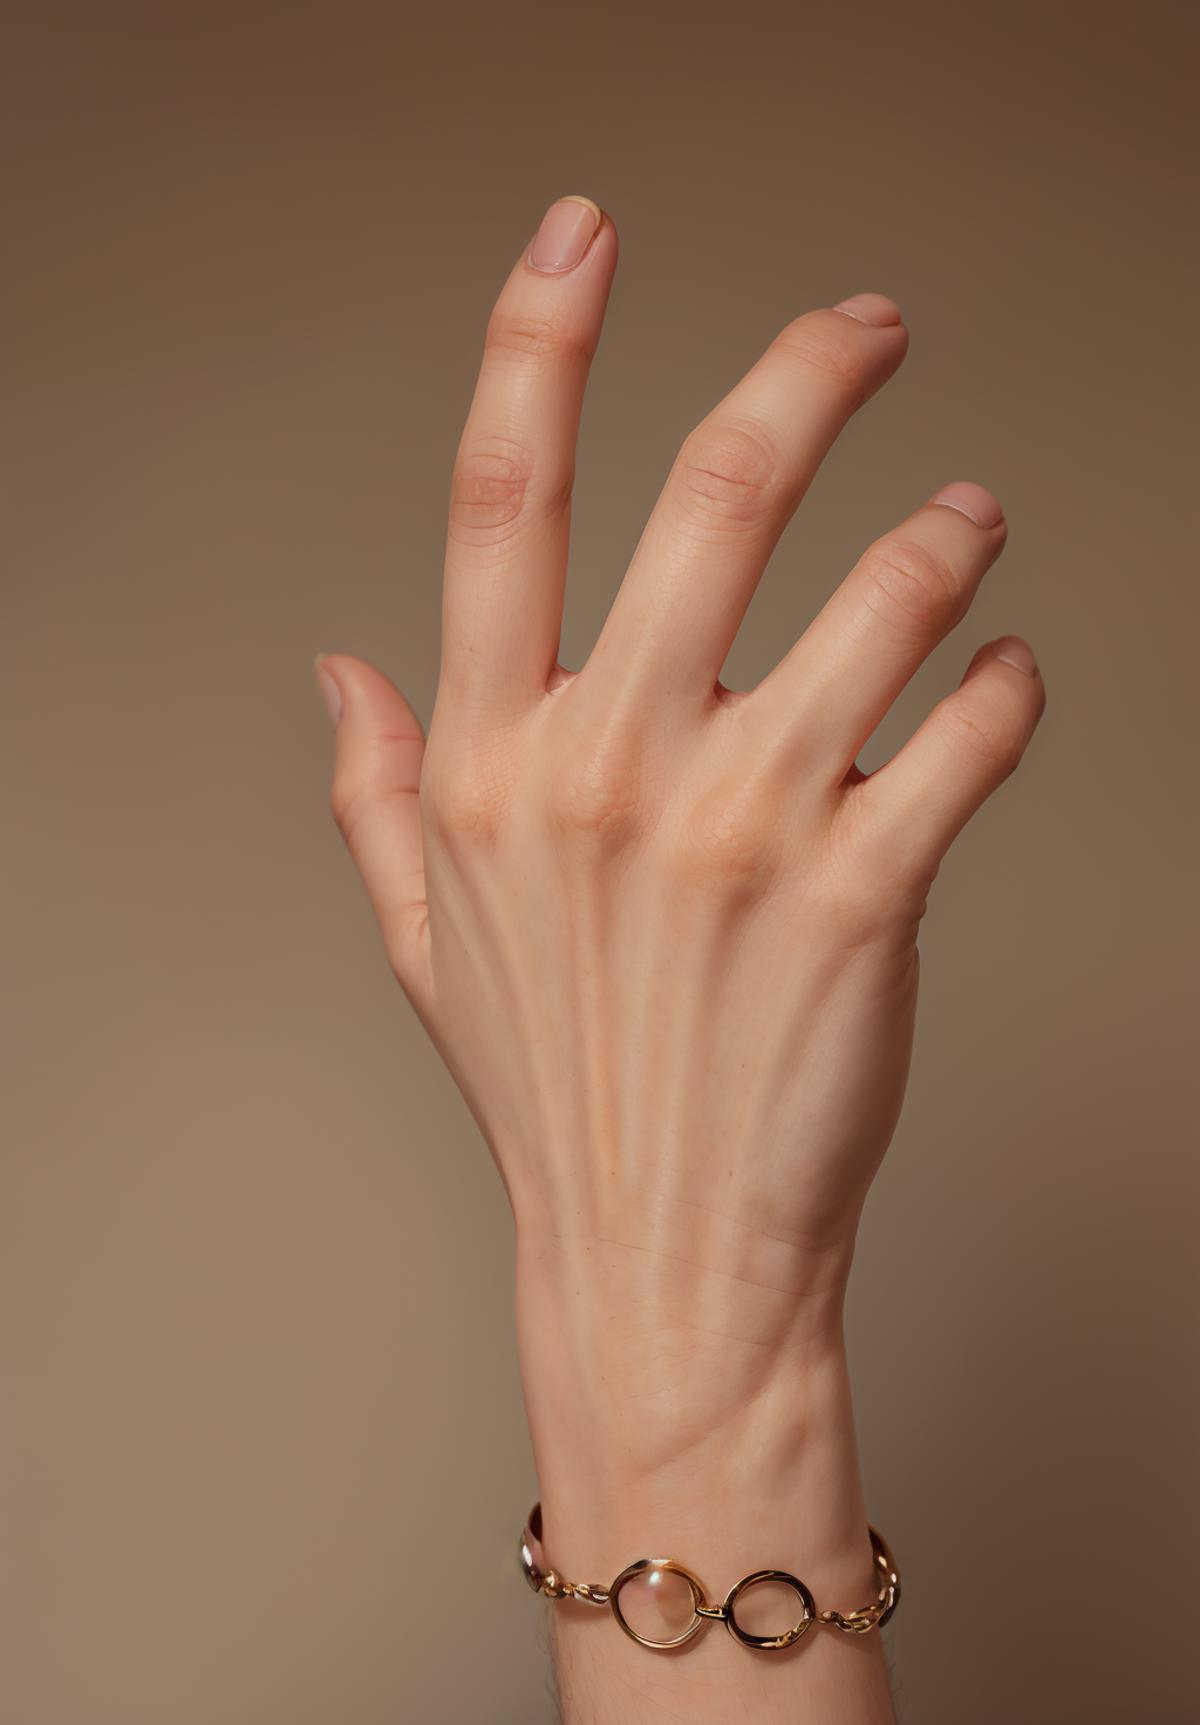 male hand-hands-22 image by wrcui8649975